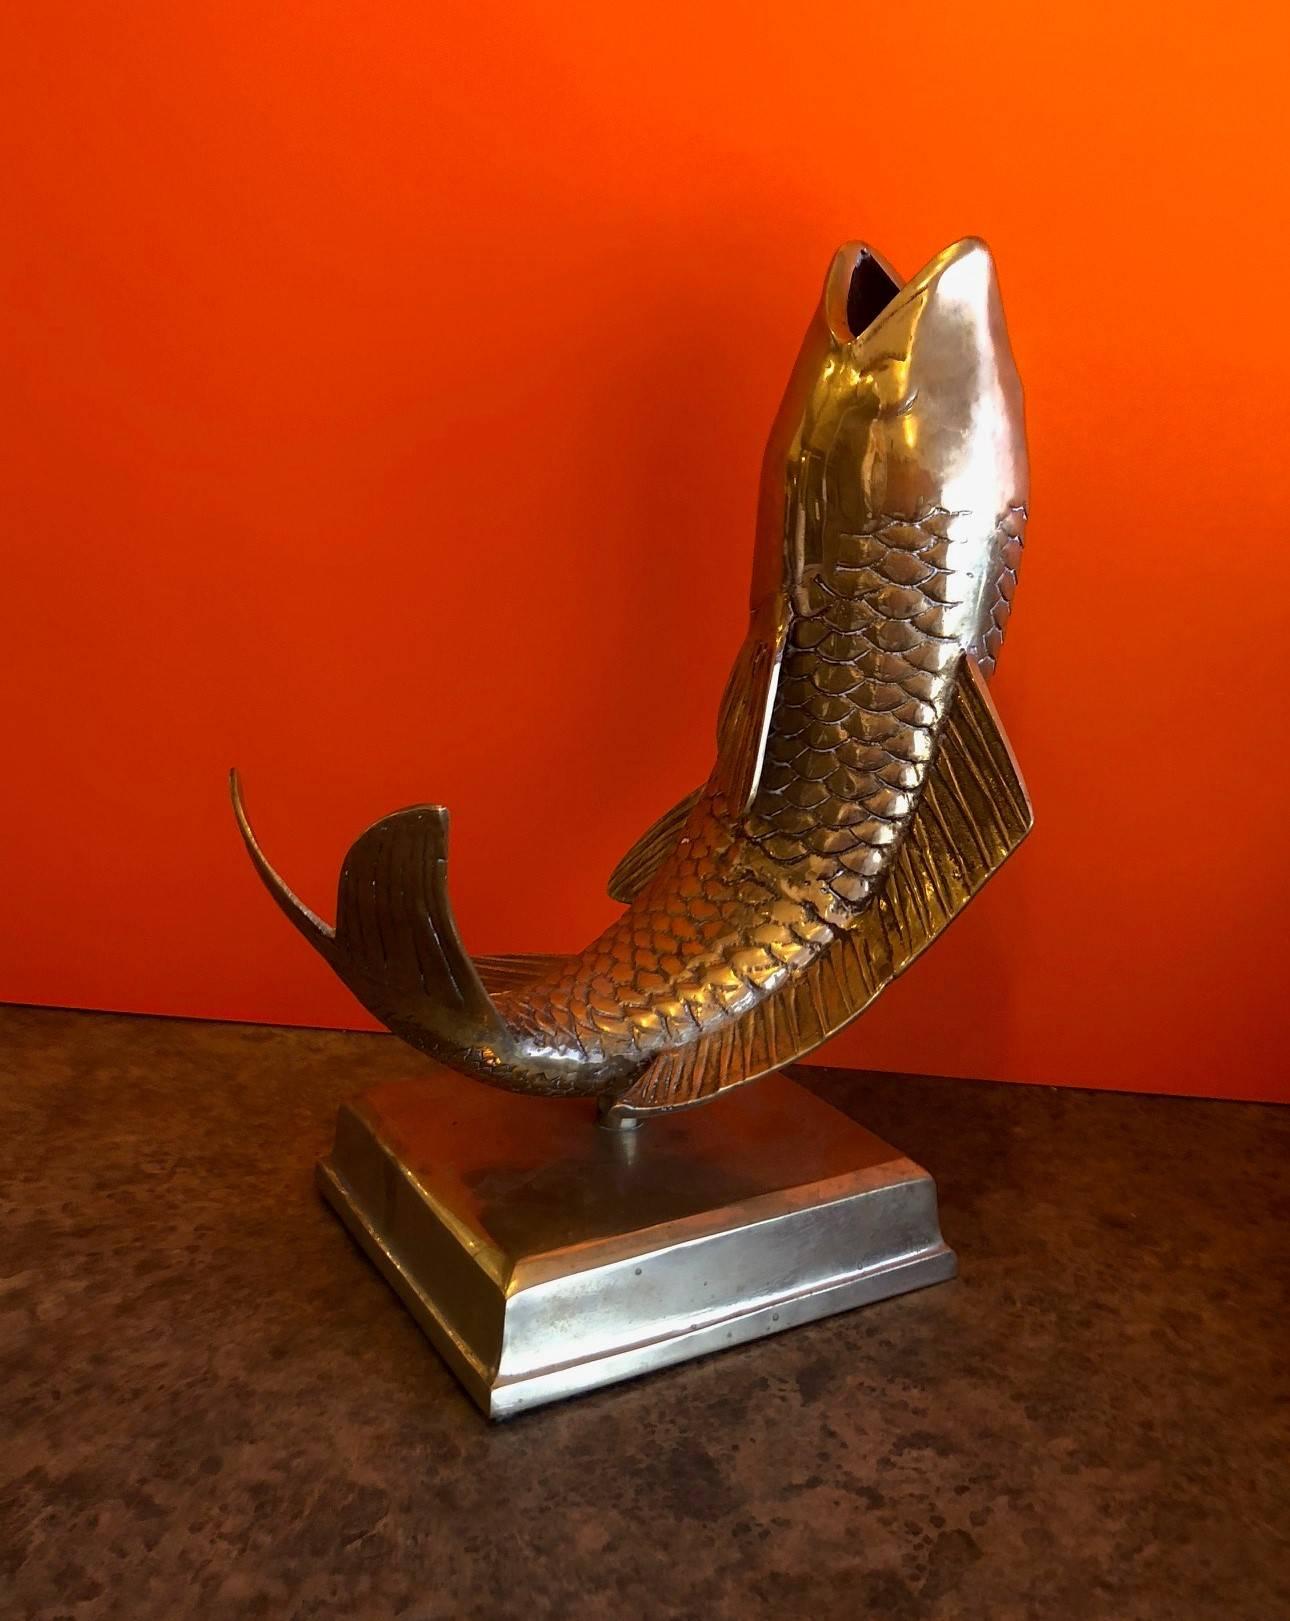 Impressive solid brass koi fish on base sculpture or vase, circa 1950s. Very good vintage condition with a nice patina. Base measures 9